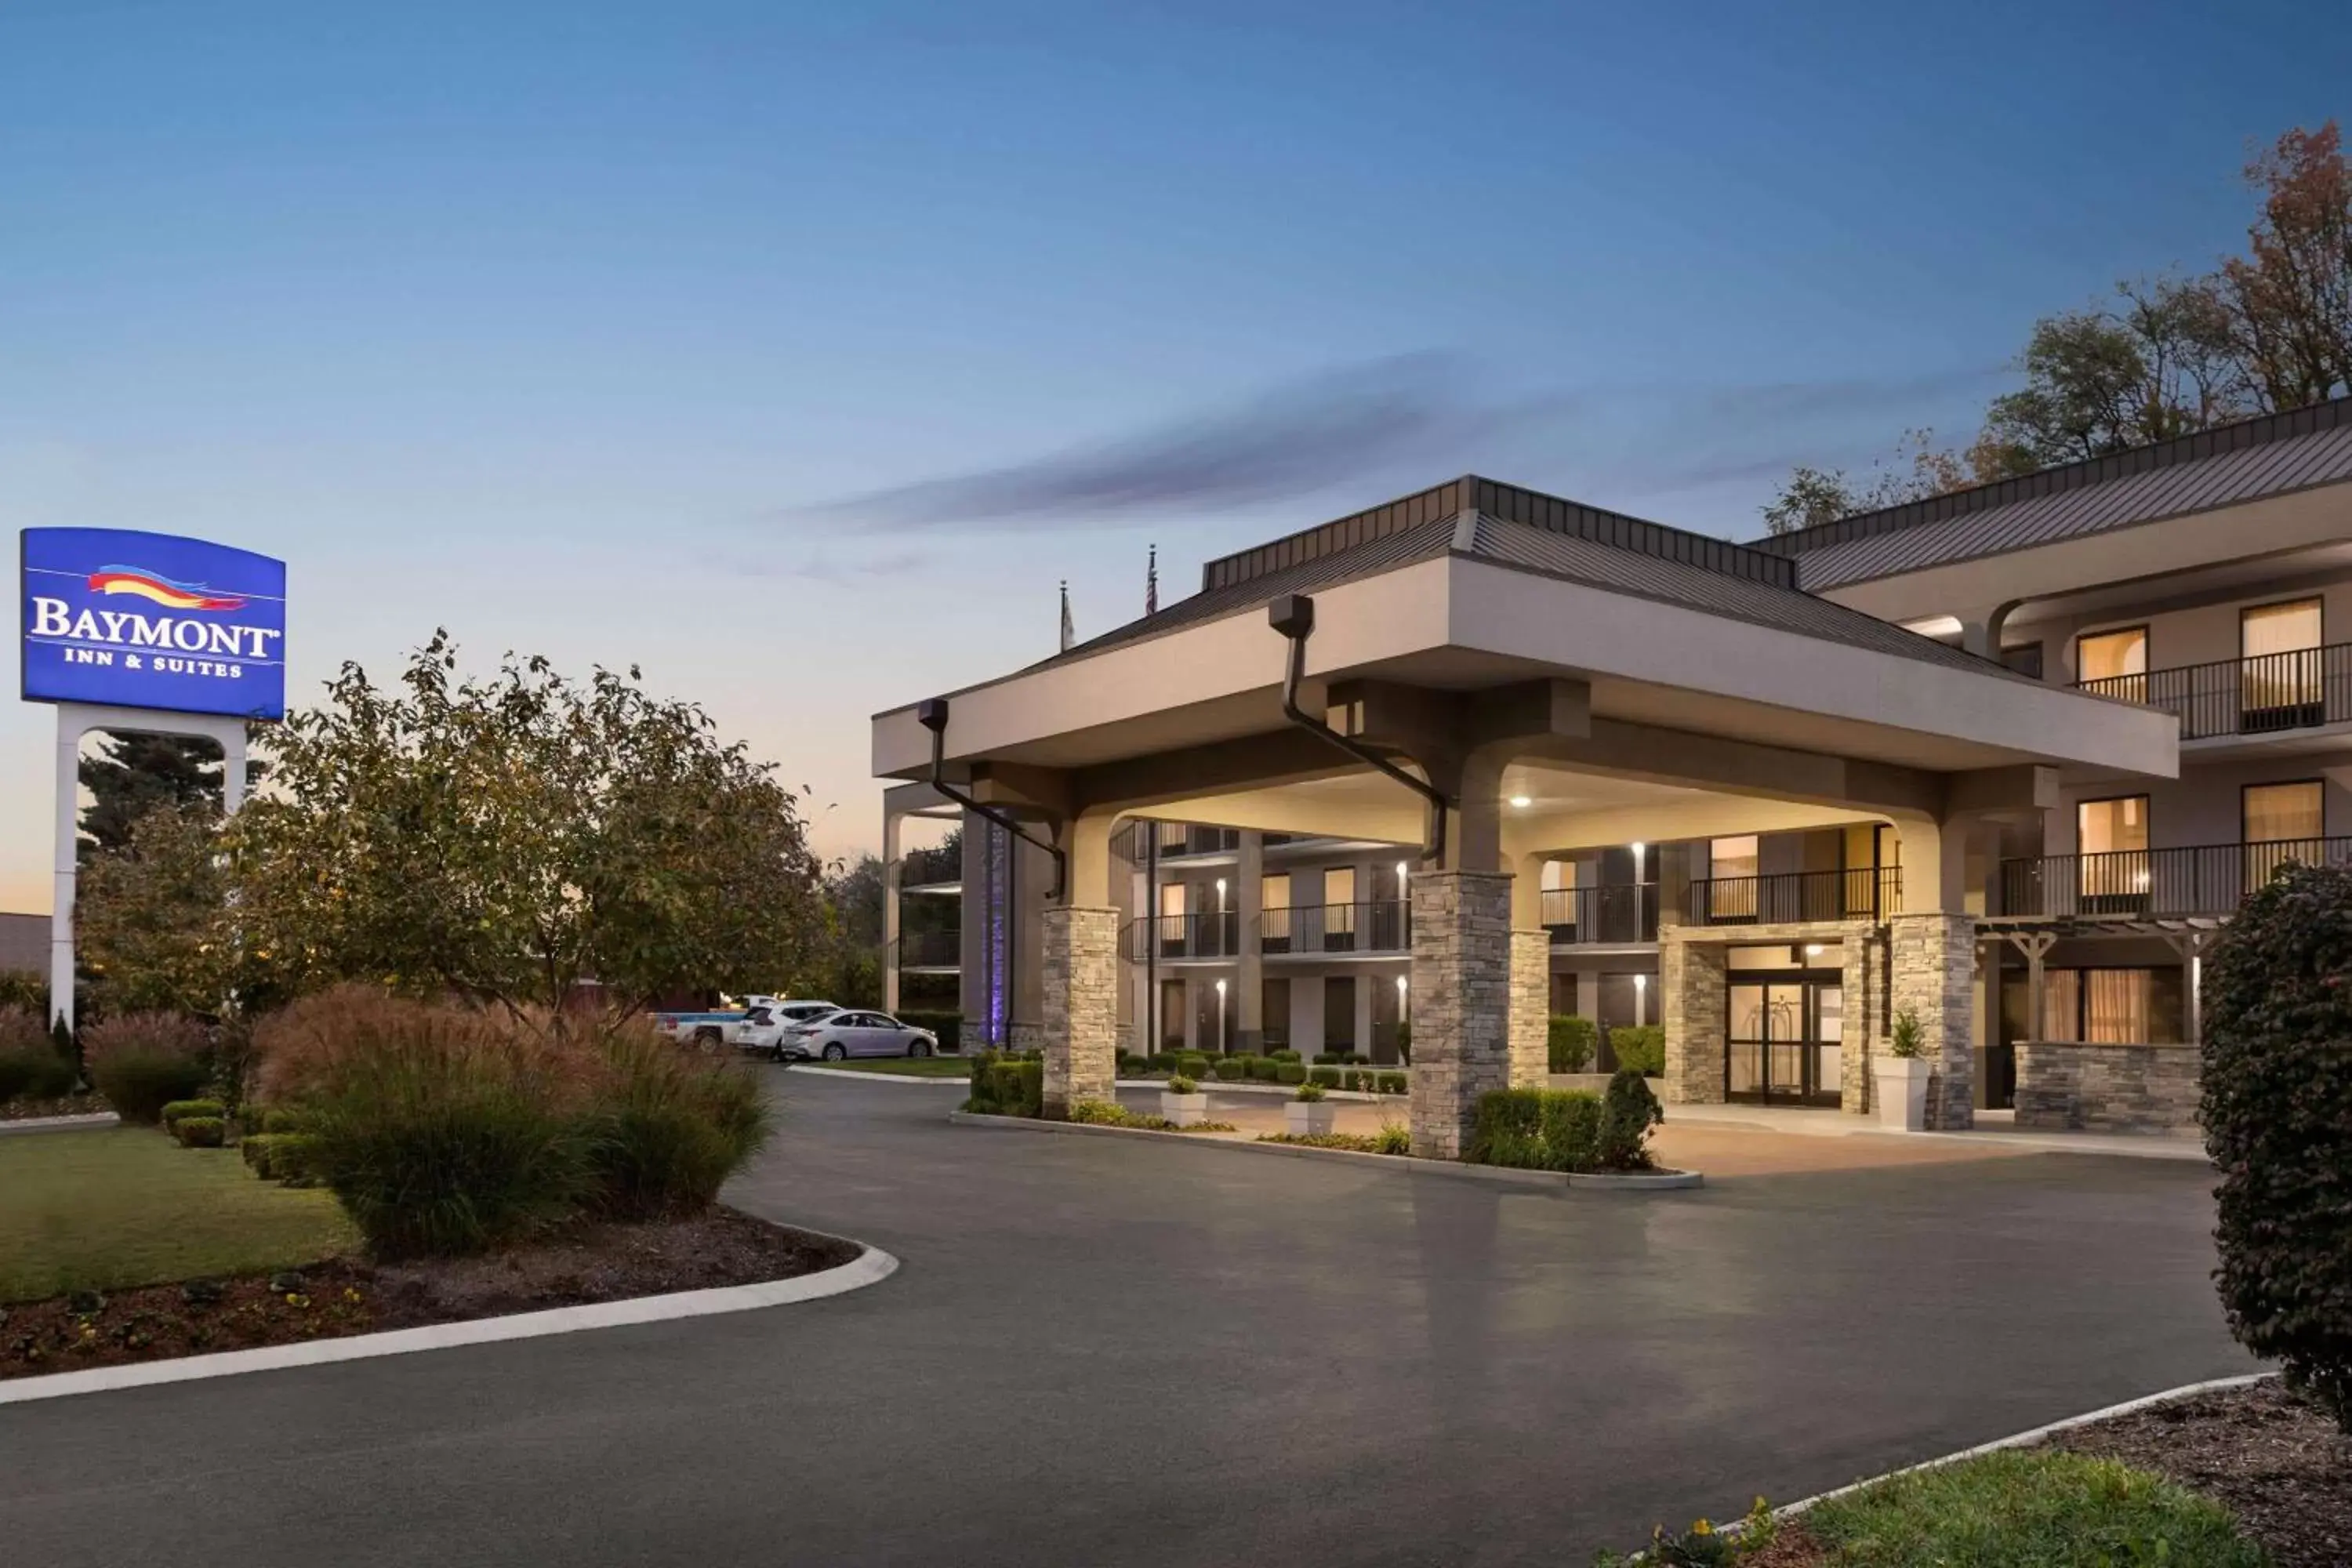 Property building in Baymont by Wyndham Nashville Airport